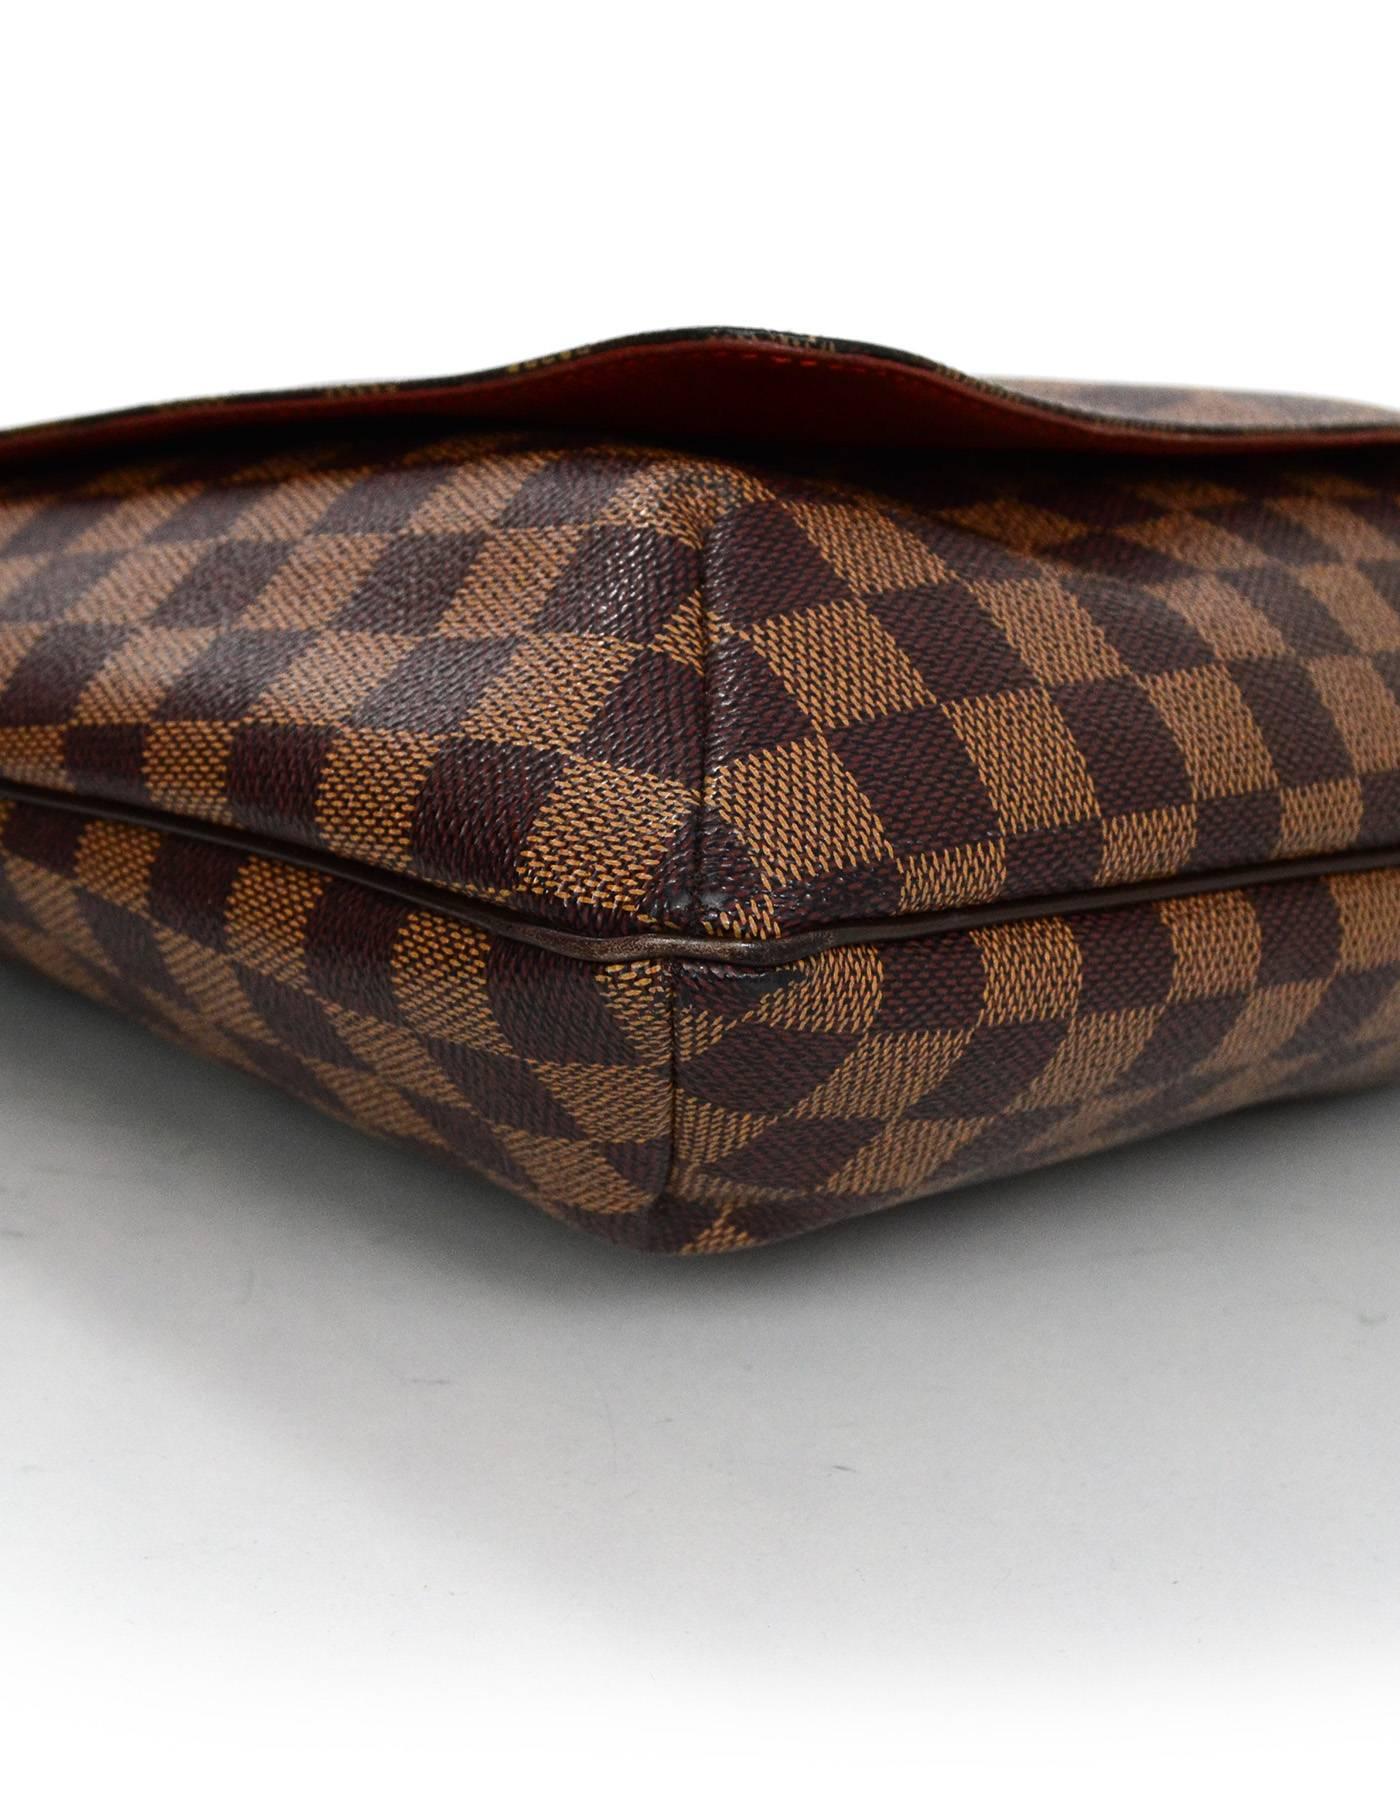 Louis Vuitton Damier Ebene Musette Salsa Messenger Bag In Excellent Condition In New York, NY